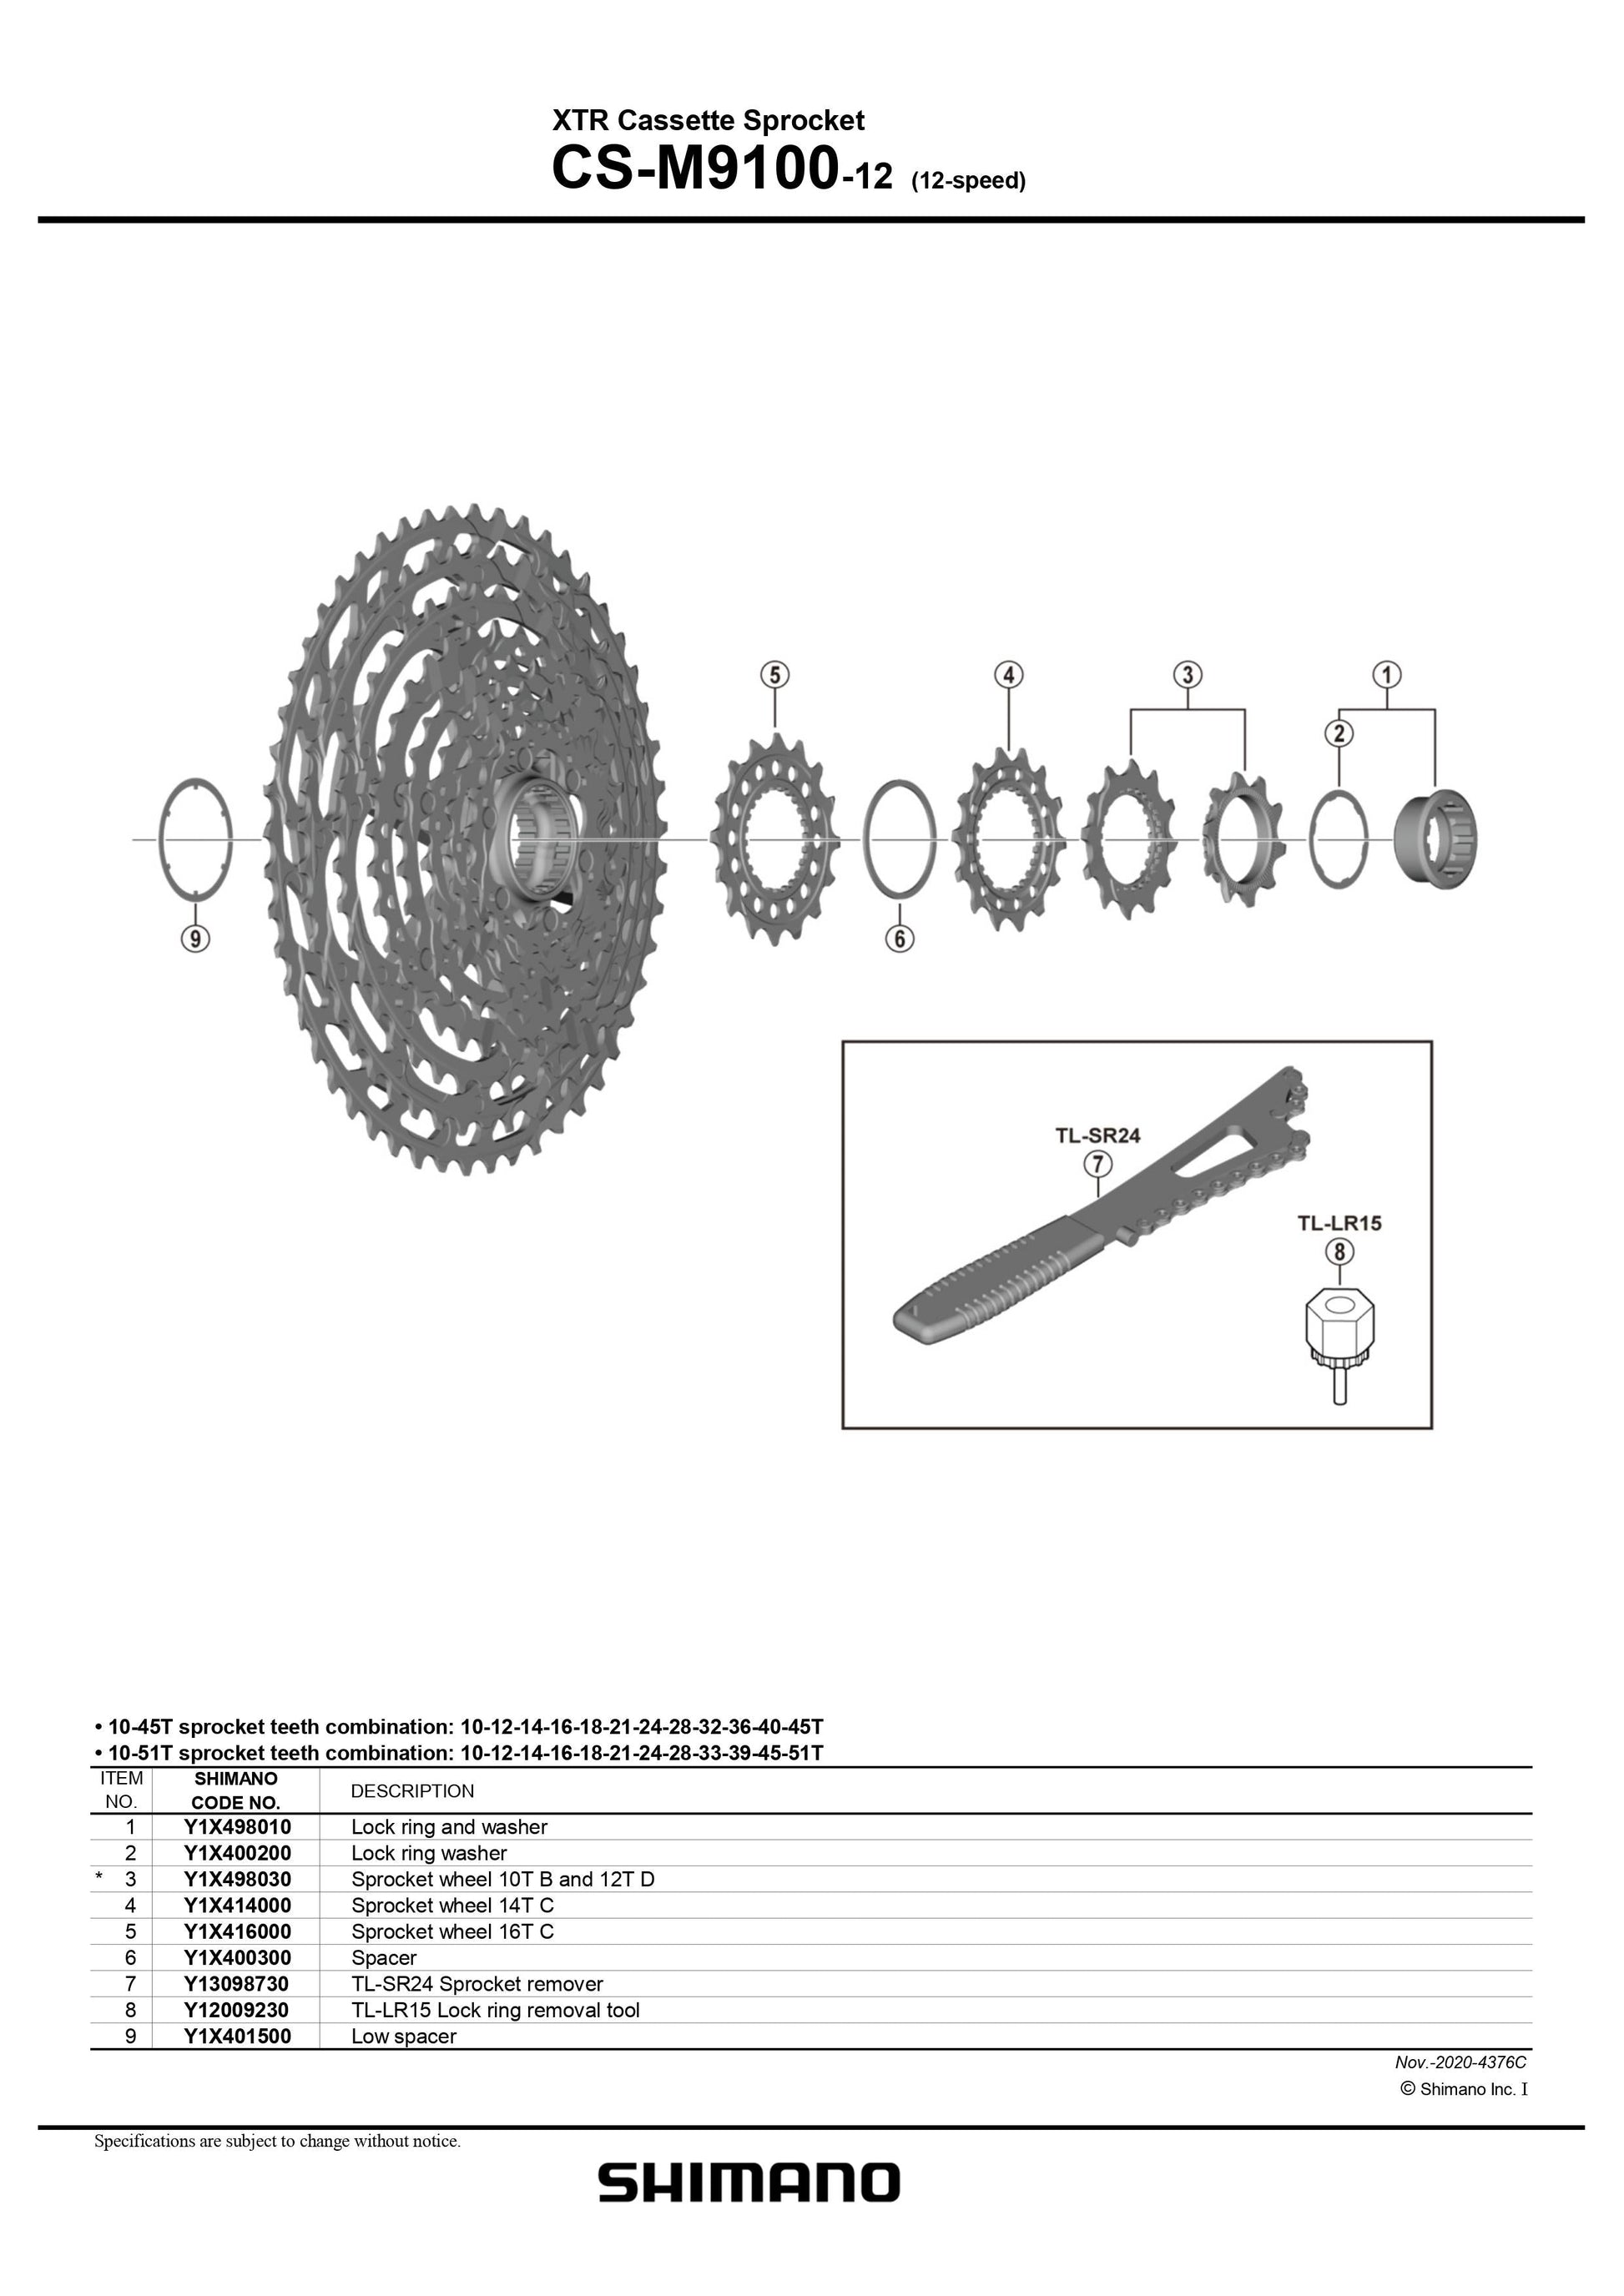 SHIMANO XTR CS-M9100-12 Cassette Sprocket Spacer - (12-speed) - Y1X400300-Pit Crew Cycles